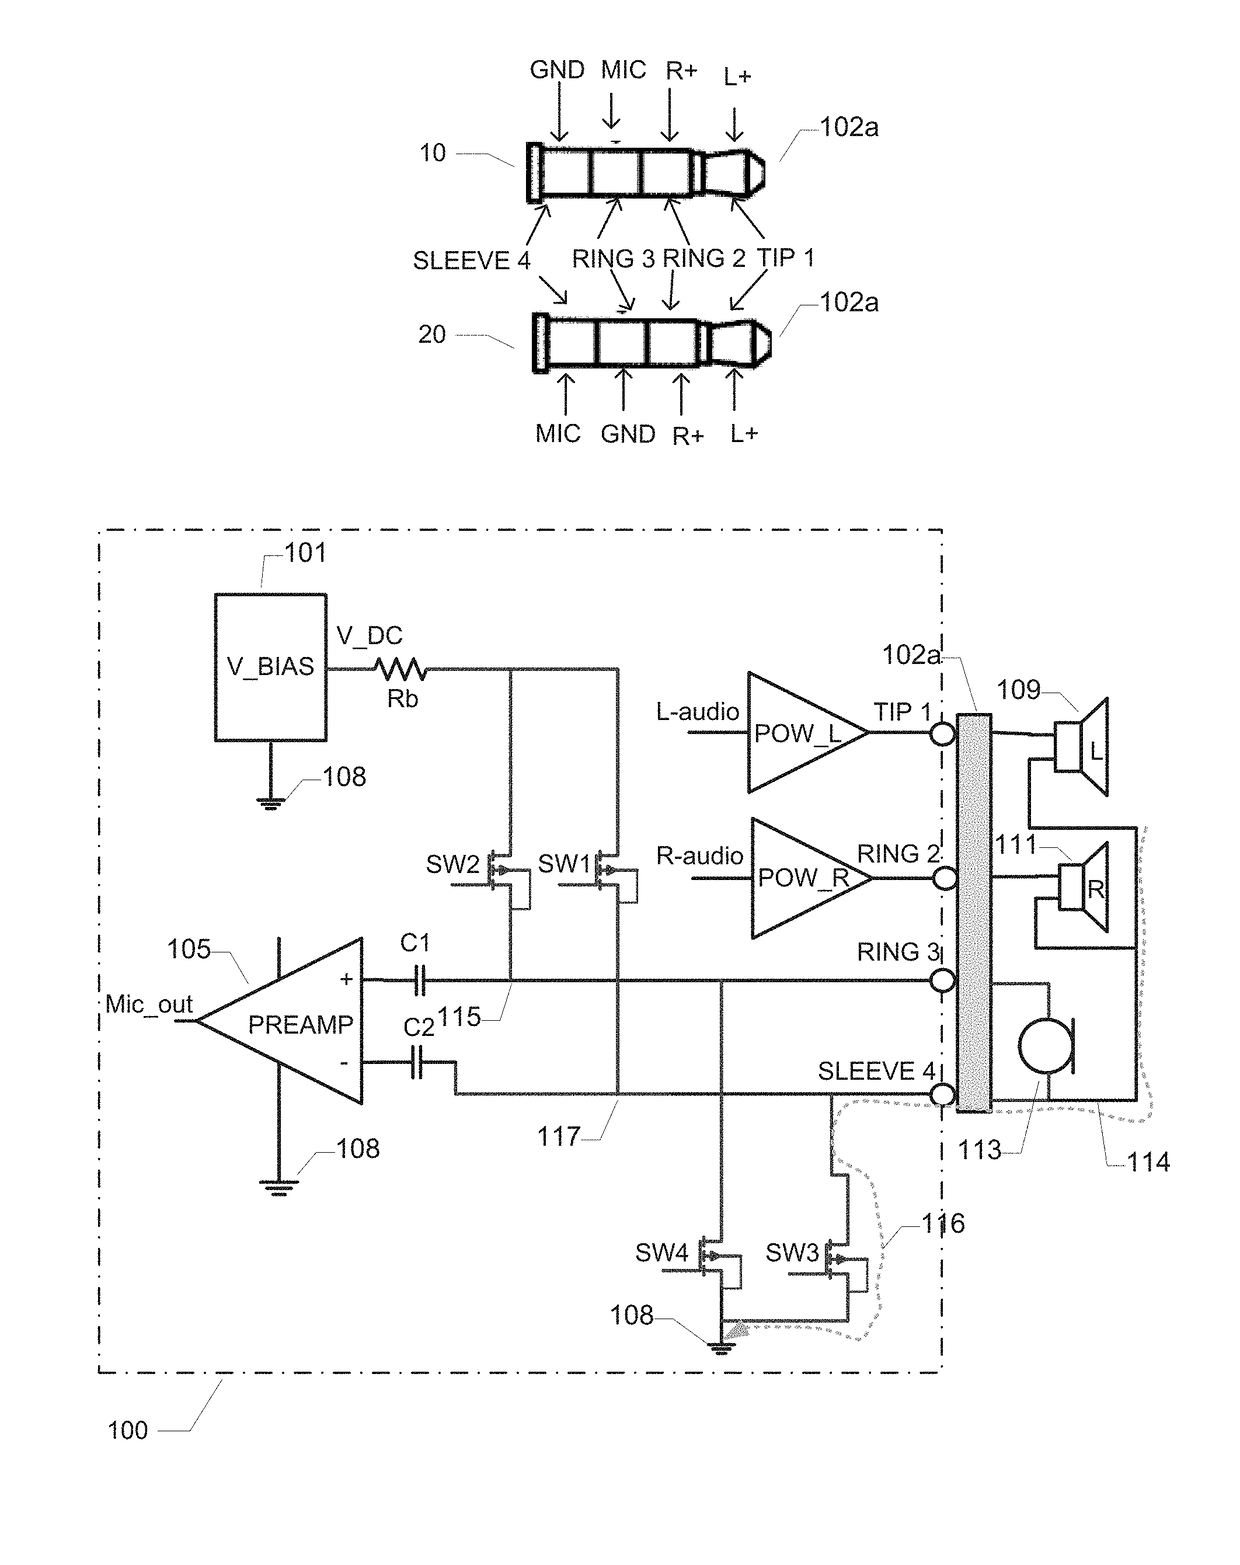 Headset amplification circuit with error voltage suppression